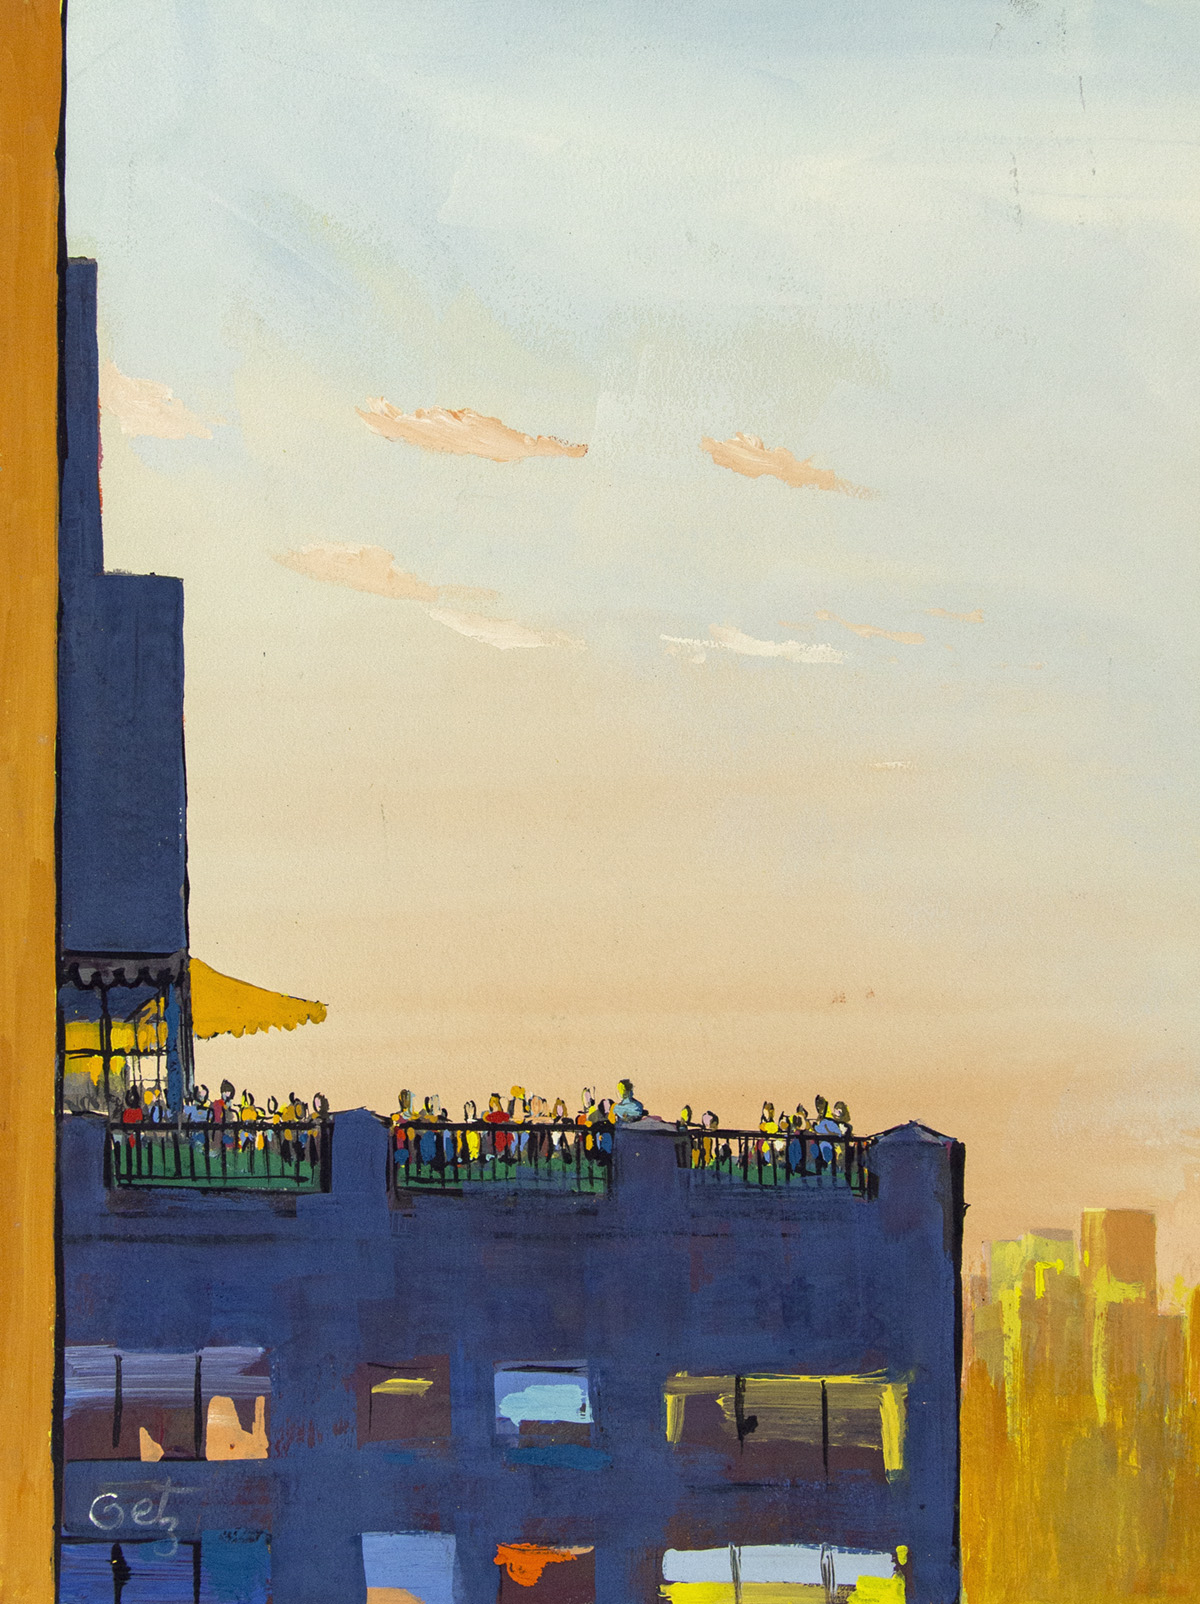 ARTHUR GETZ. Rooftop Party. [NEW YORKER / COVER ART]